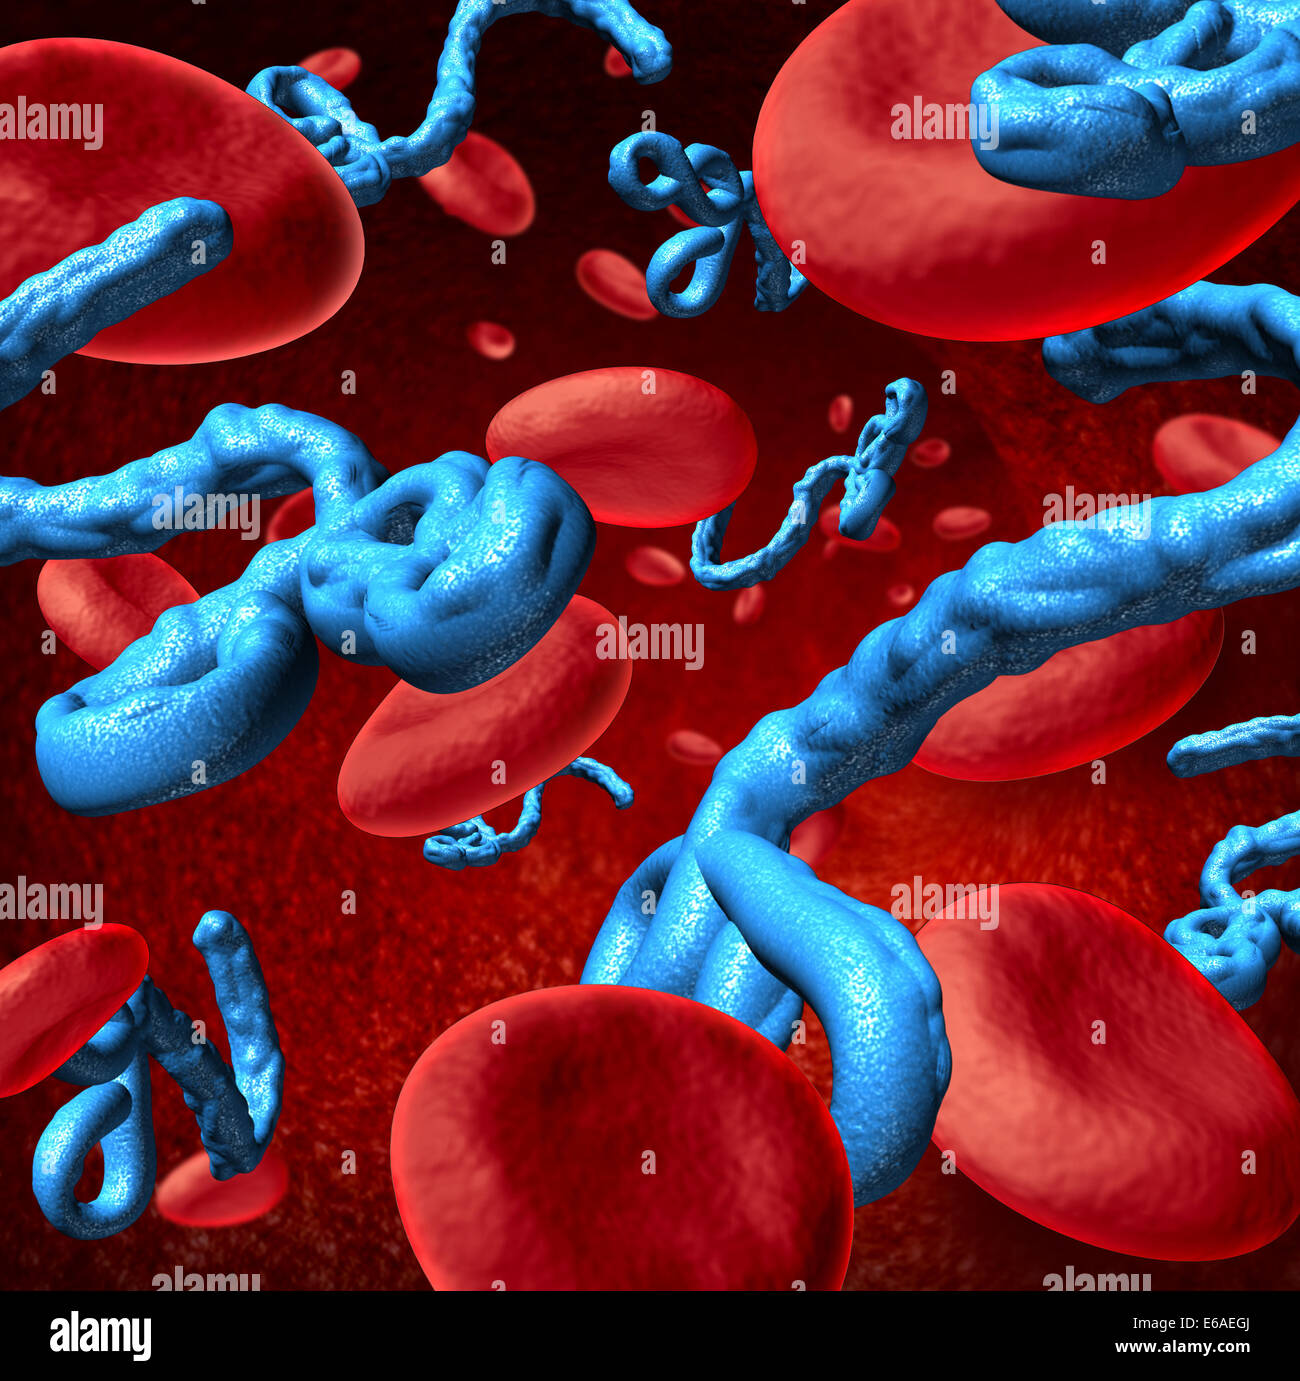 Ebola disease virus in the human body medical concept as three dimensional microbes with blood cells as a health symbol of the dangers of an infection from a deadly microorganism. Stock Photo